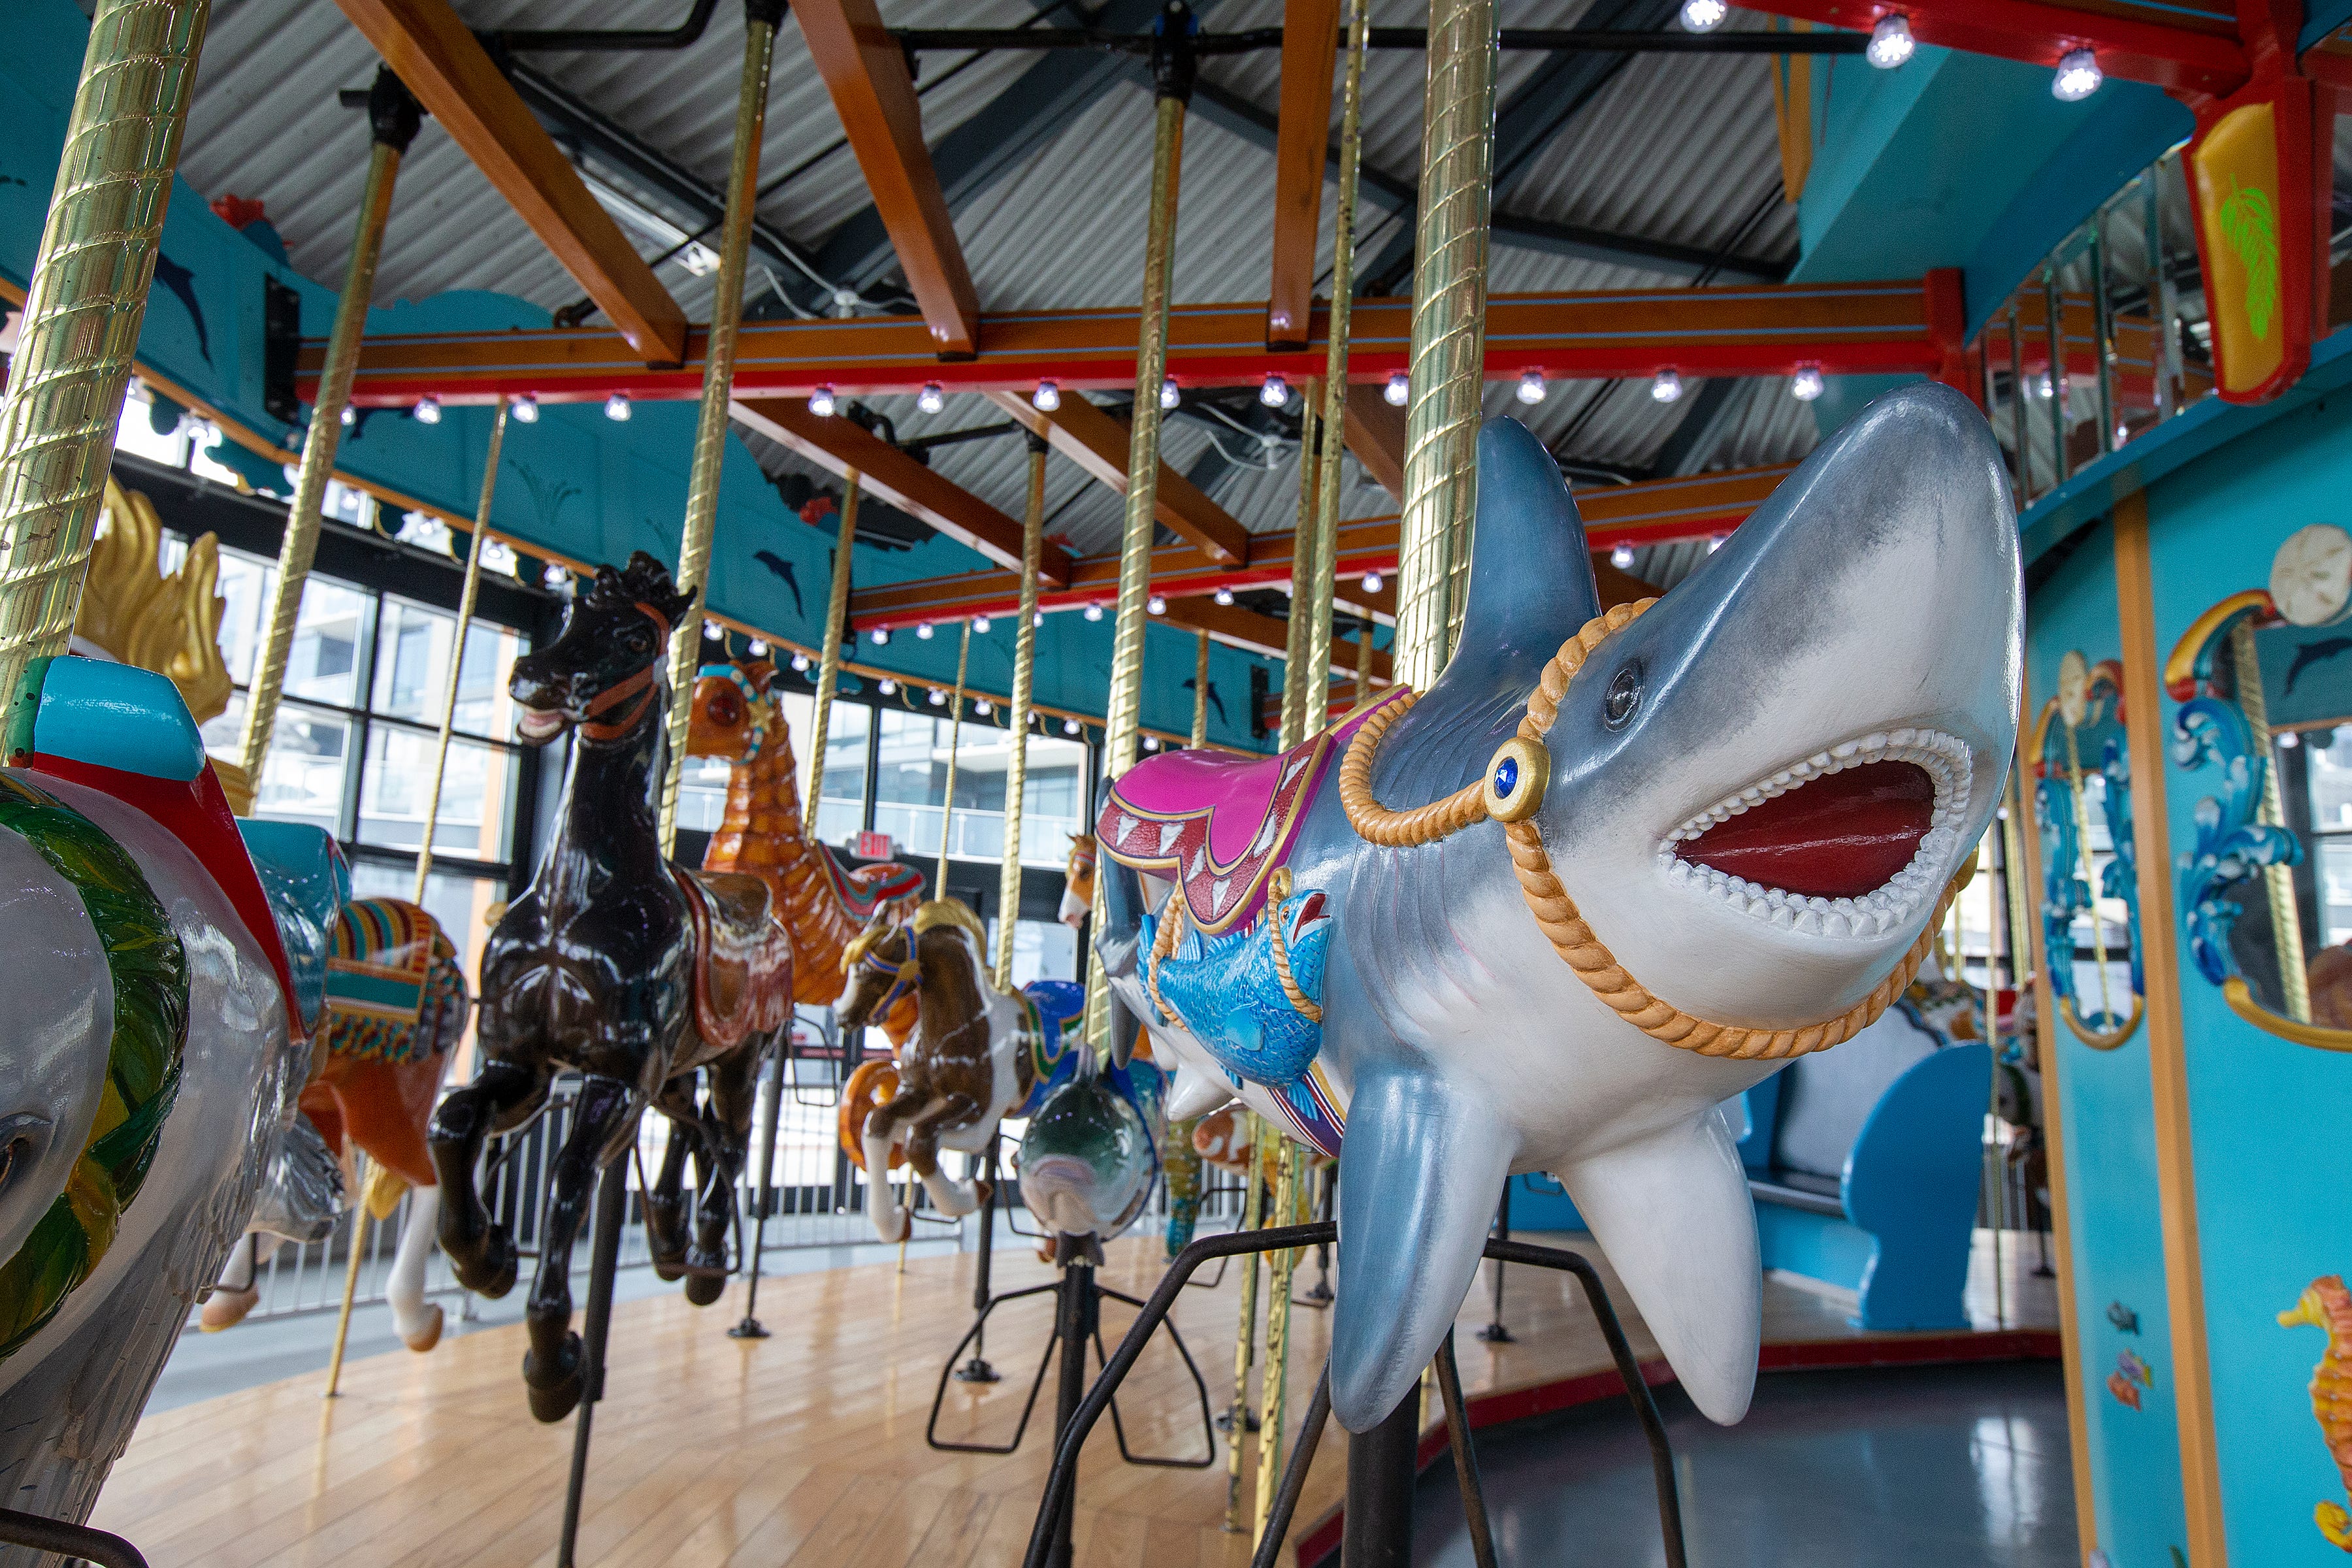 Sea creatures join traditional horses at the carousel at Pier Village in Long Branch.